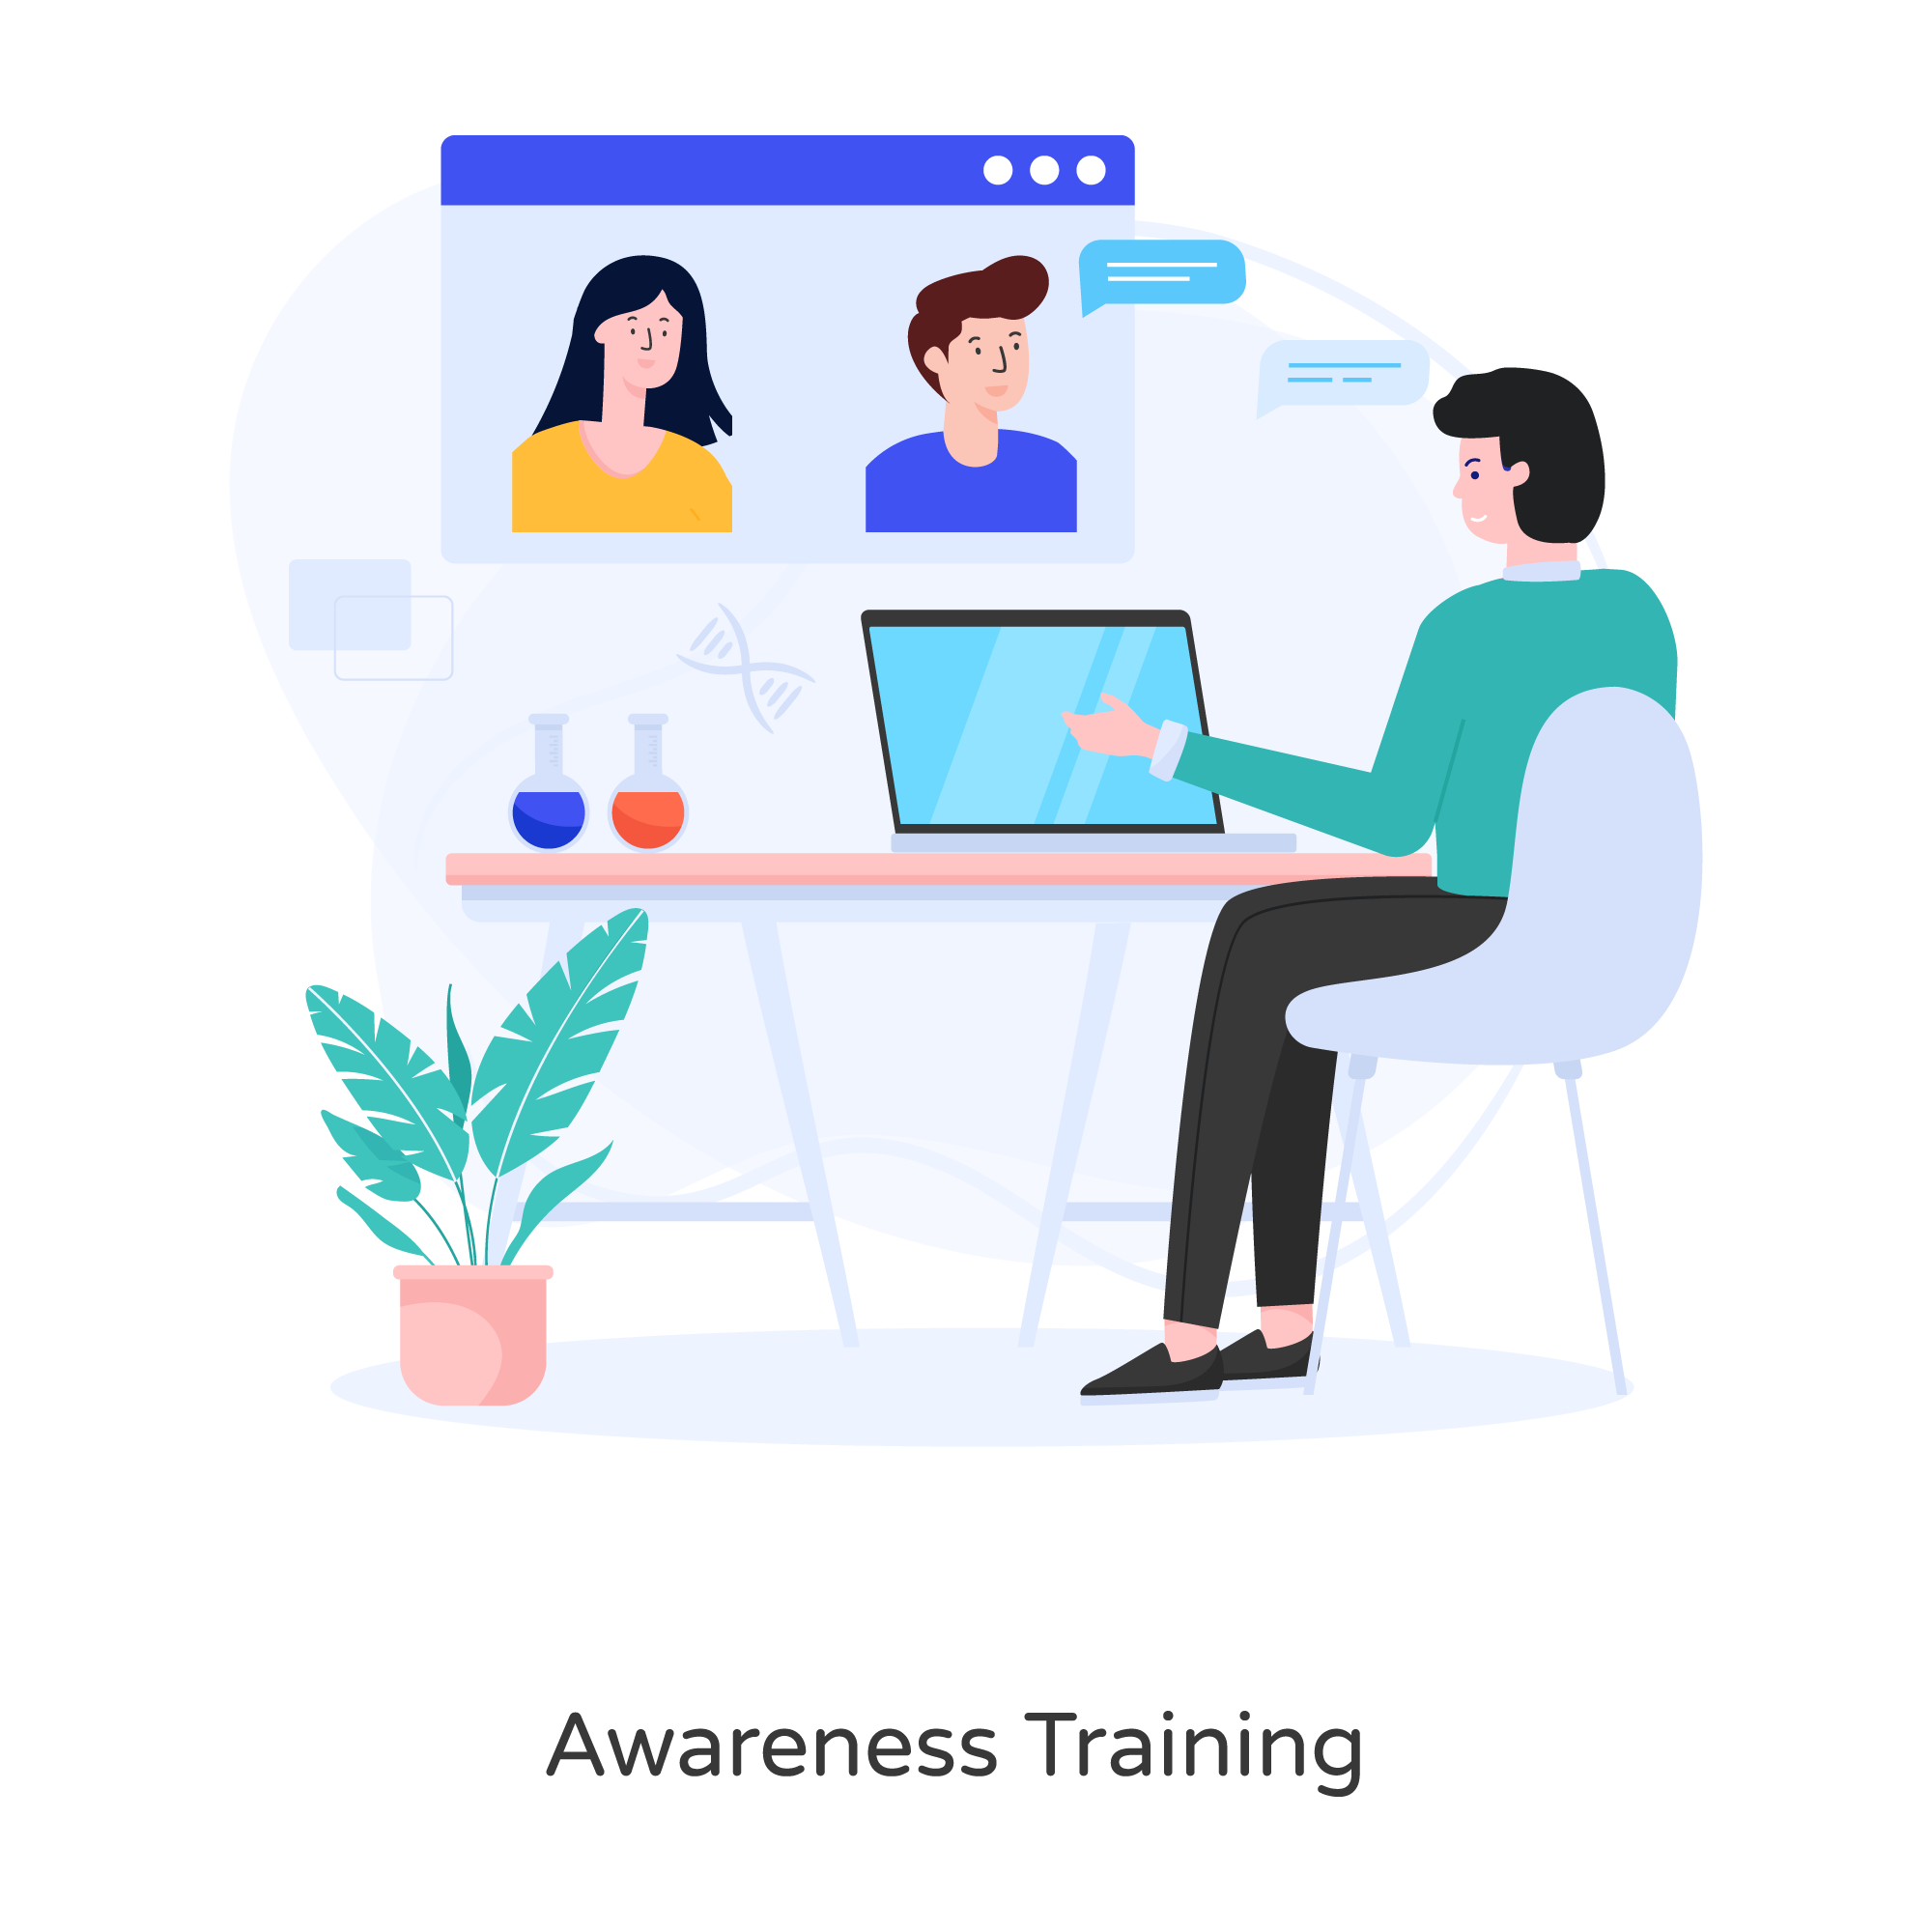 Why choose awareness training from Network Gate?